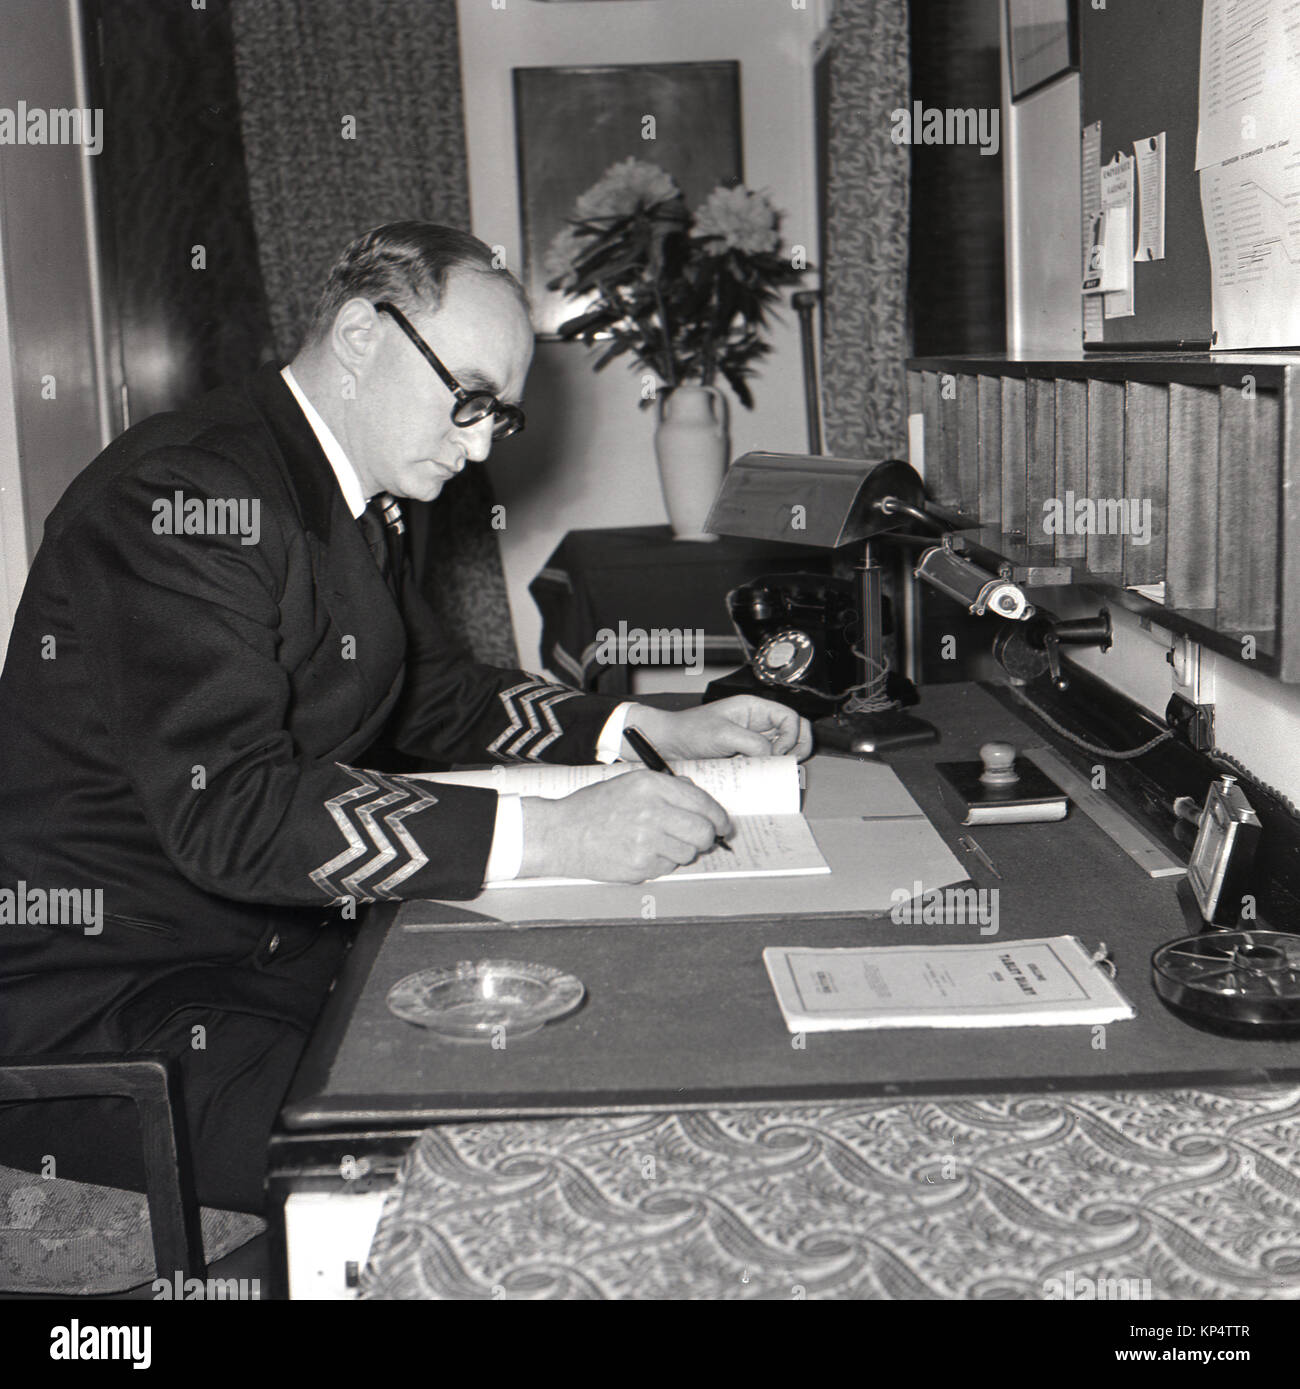 1950s, historical, picture shows a petty officer in uniform sitting working at his desk in a cabin aboard a Union-Castle steam ship. Stock Photo